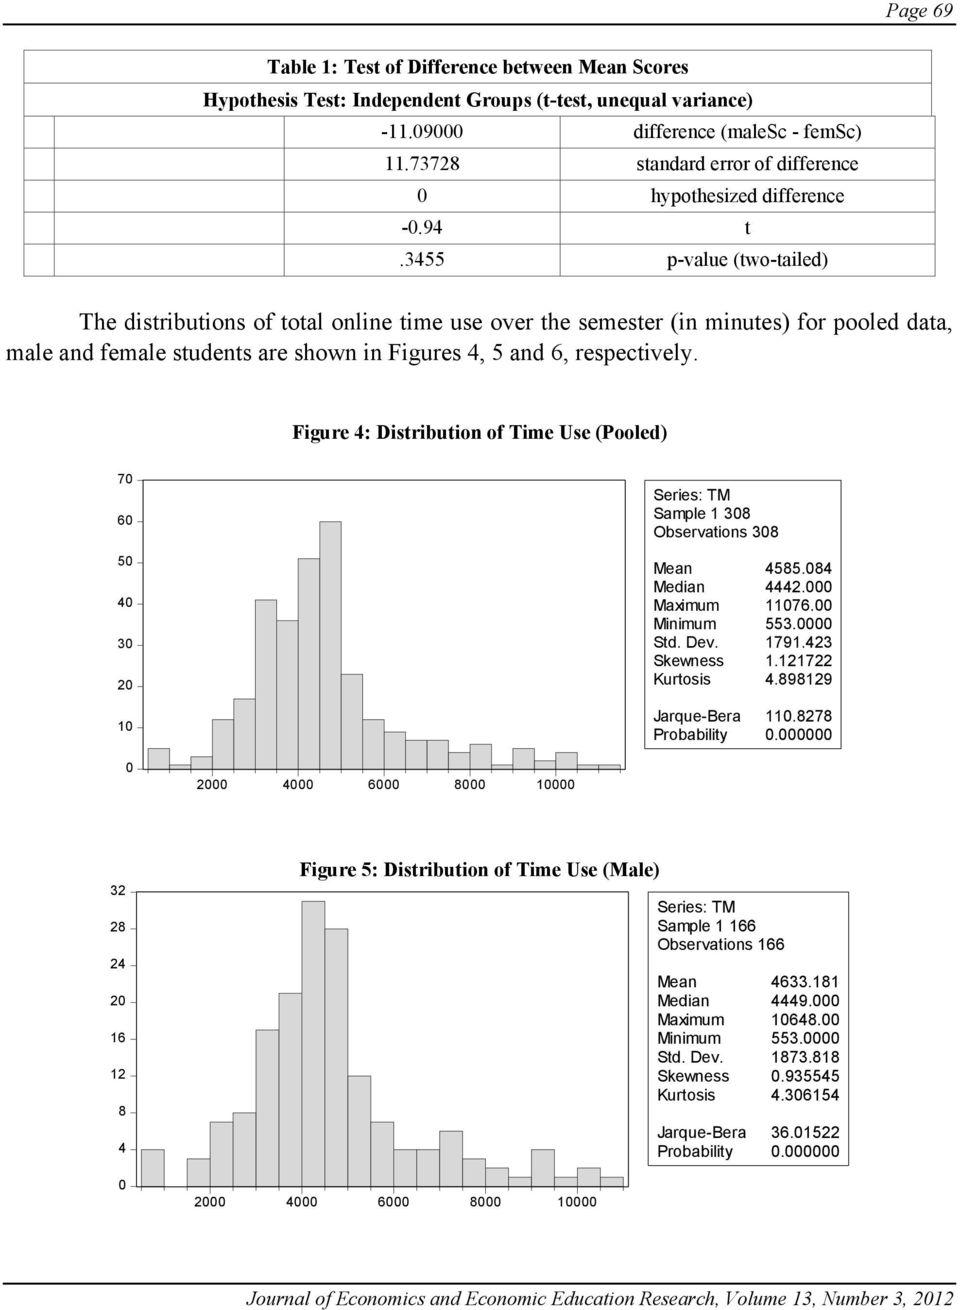 3455 p-value (two-tailed) The distributions of total online time use over the semester (in minutes) for pooled data, male and female students are shown in Figures 4, 5 and 6, respectively.